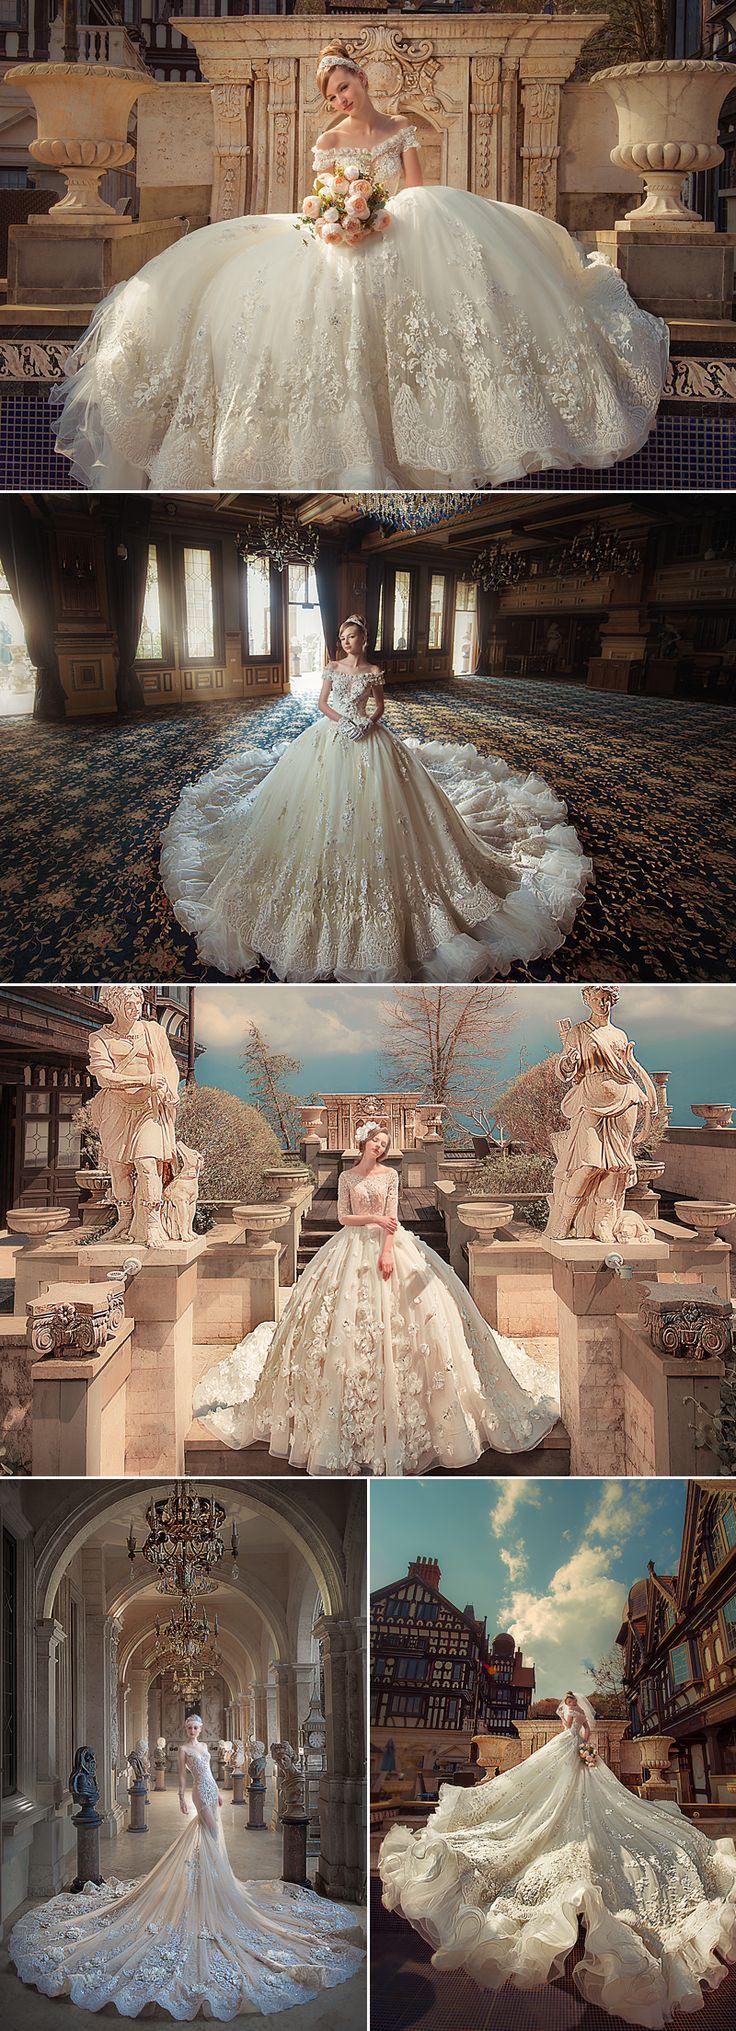 Wedding - 37 Jaw-Droppingly Beautiful Gowns For A Ballroom Wedding